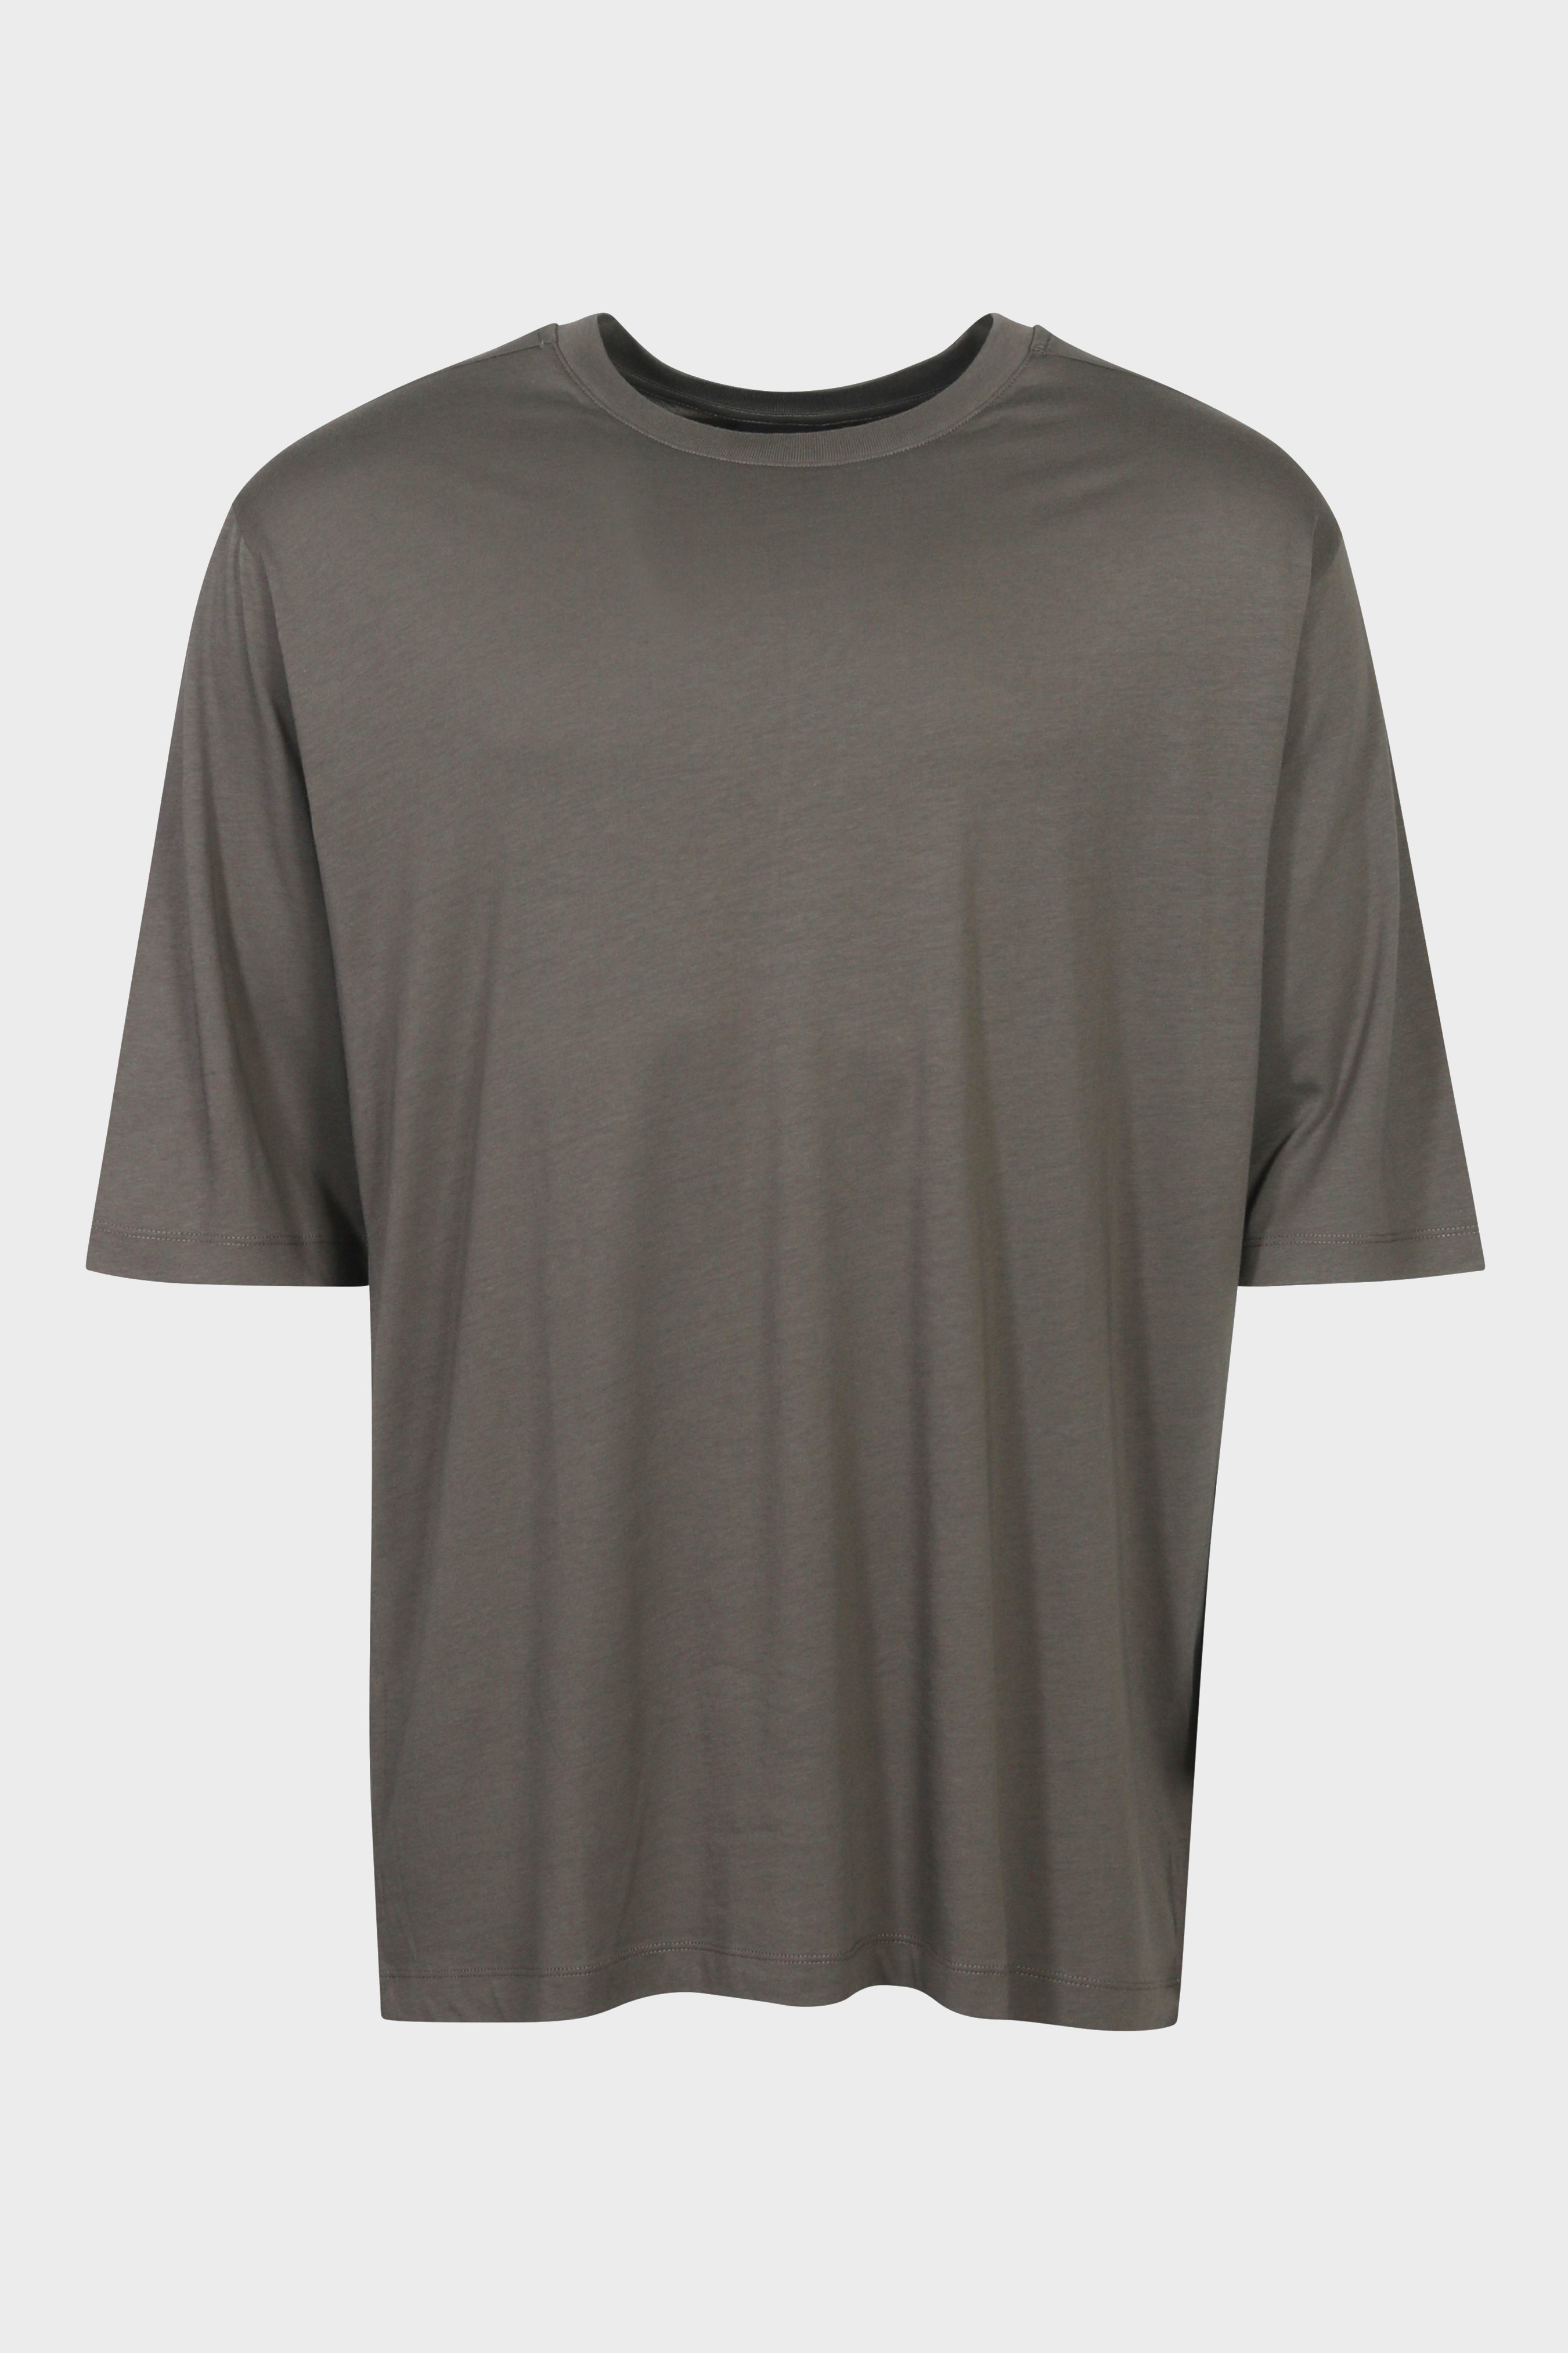 THOM KROM Oversize T-Shirt in Ivy Green M